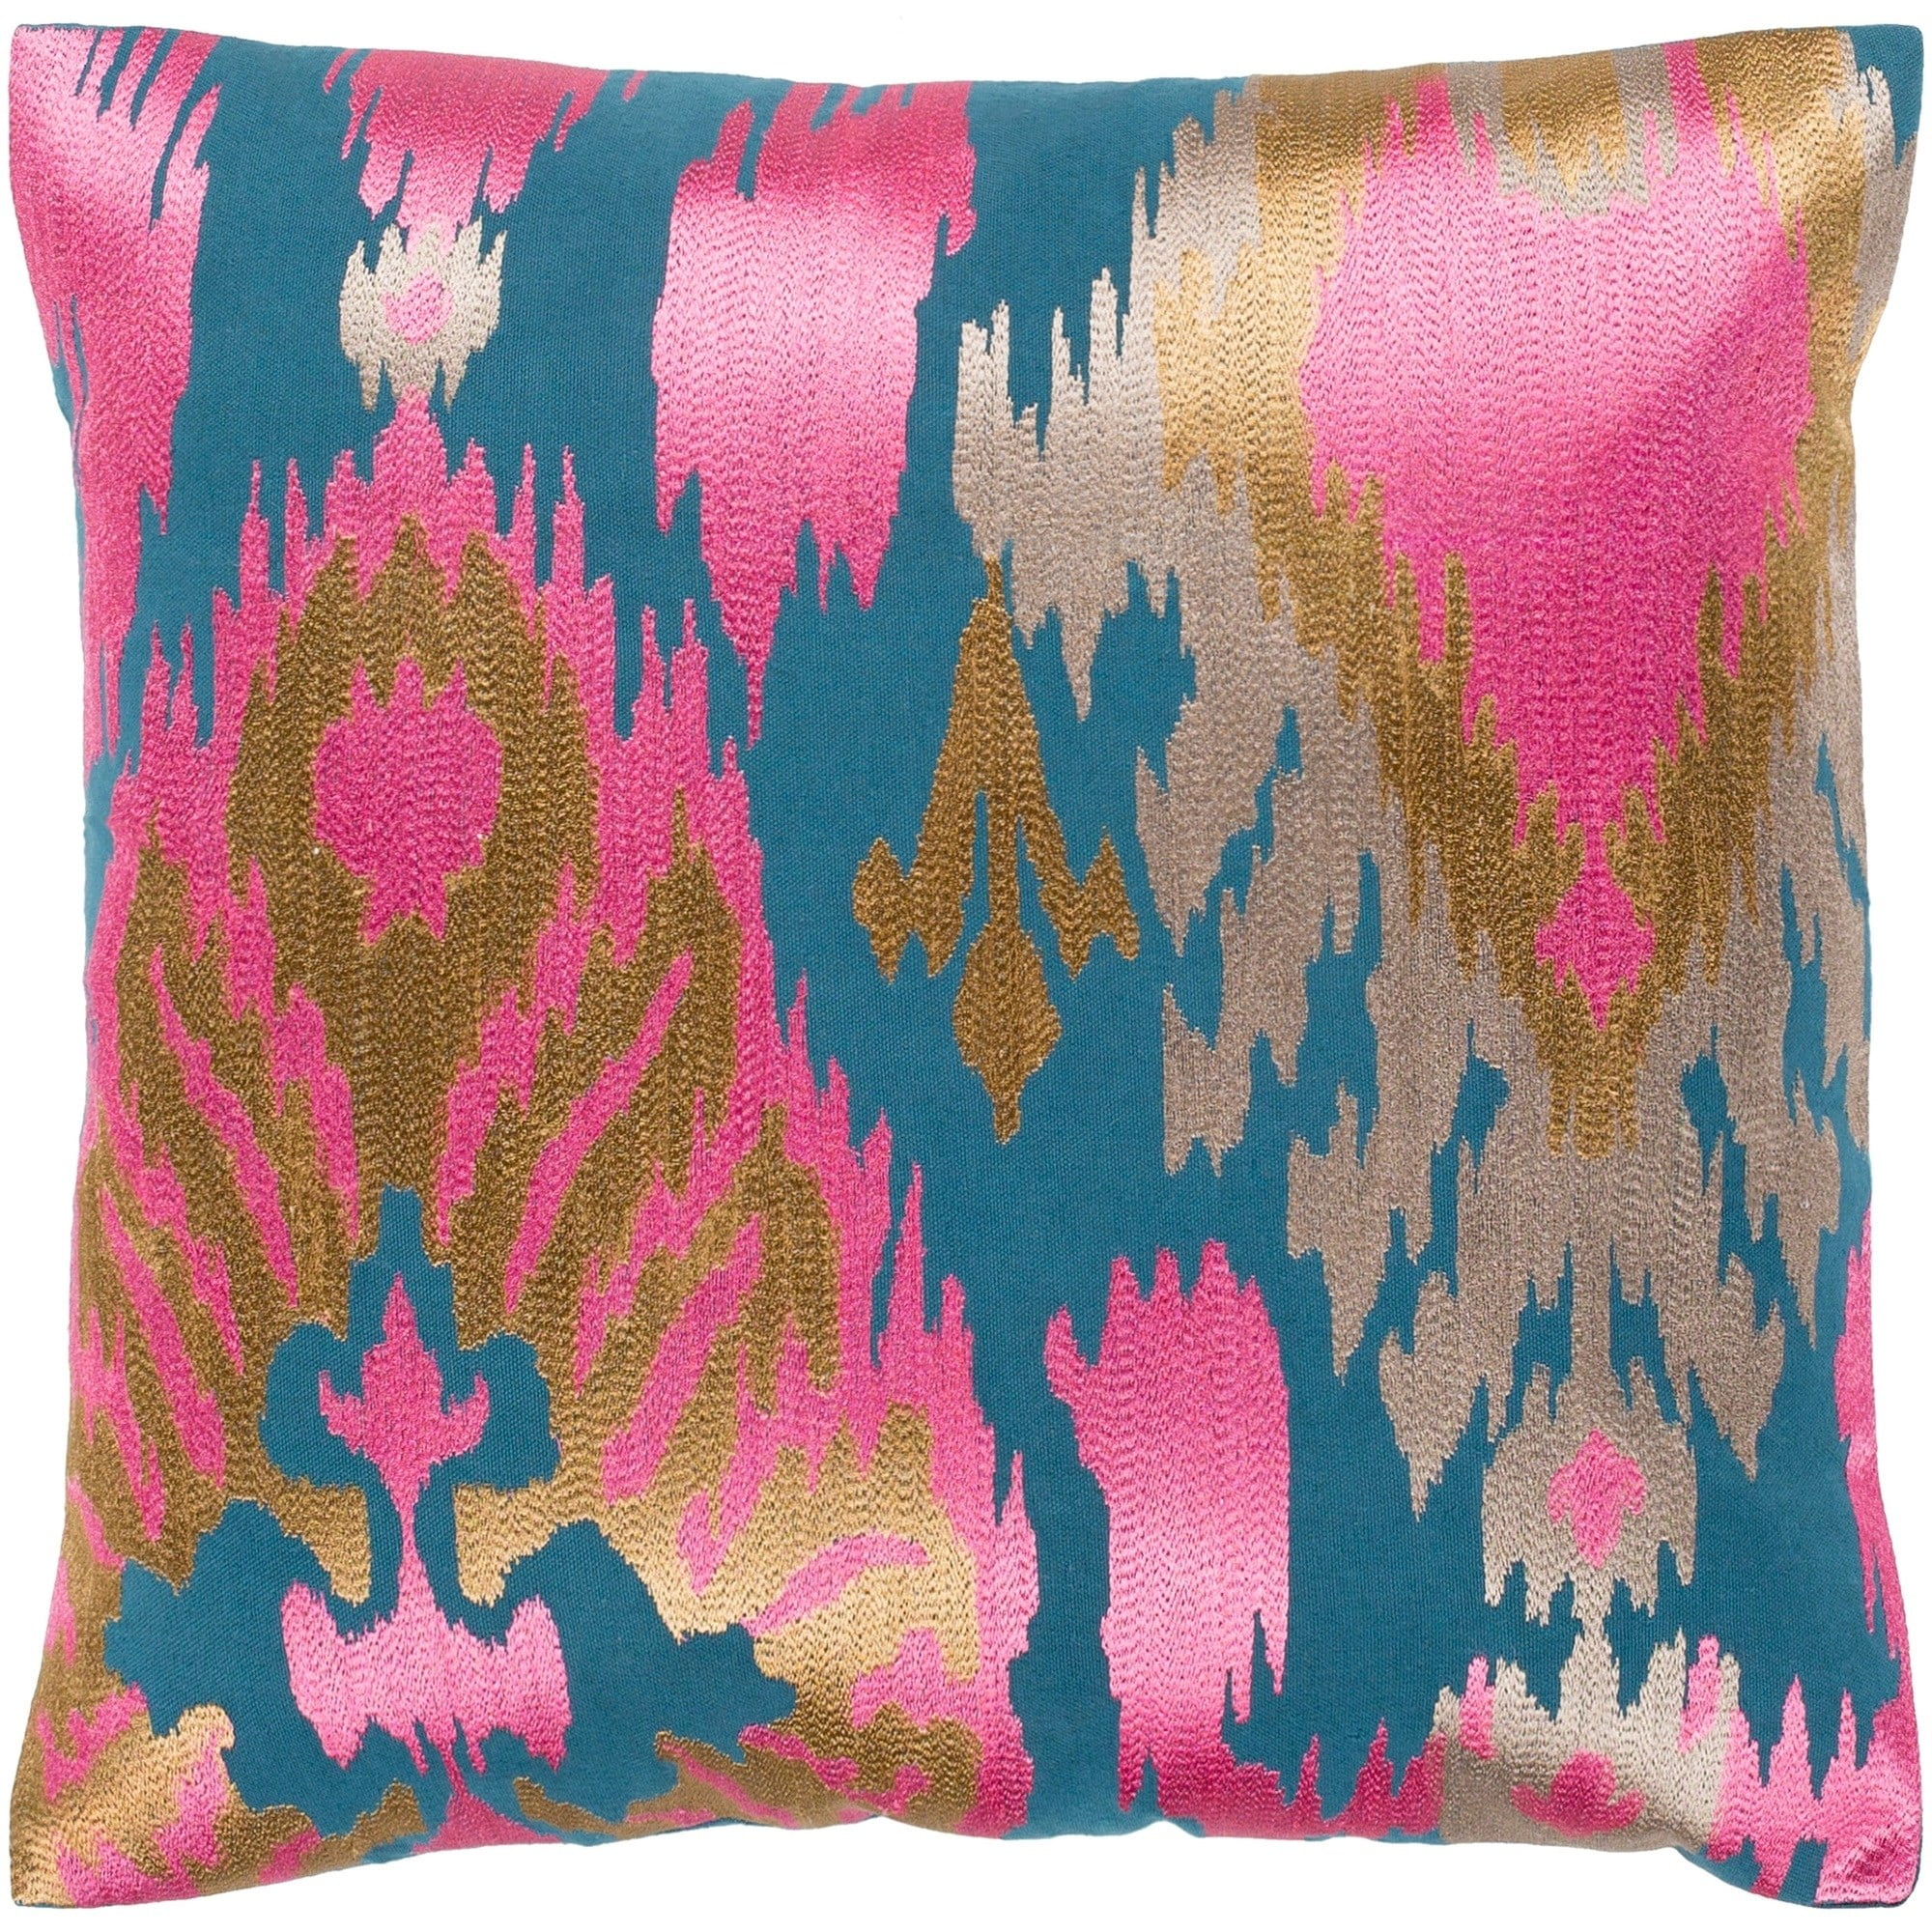 20" Pink Blue Decorative Woven Shag Tufted Wool Embroidered on Cotton Pillow Cus